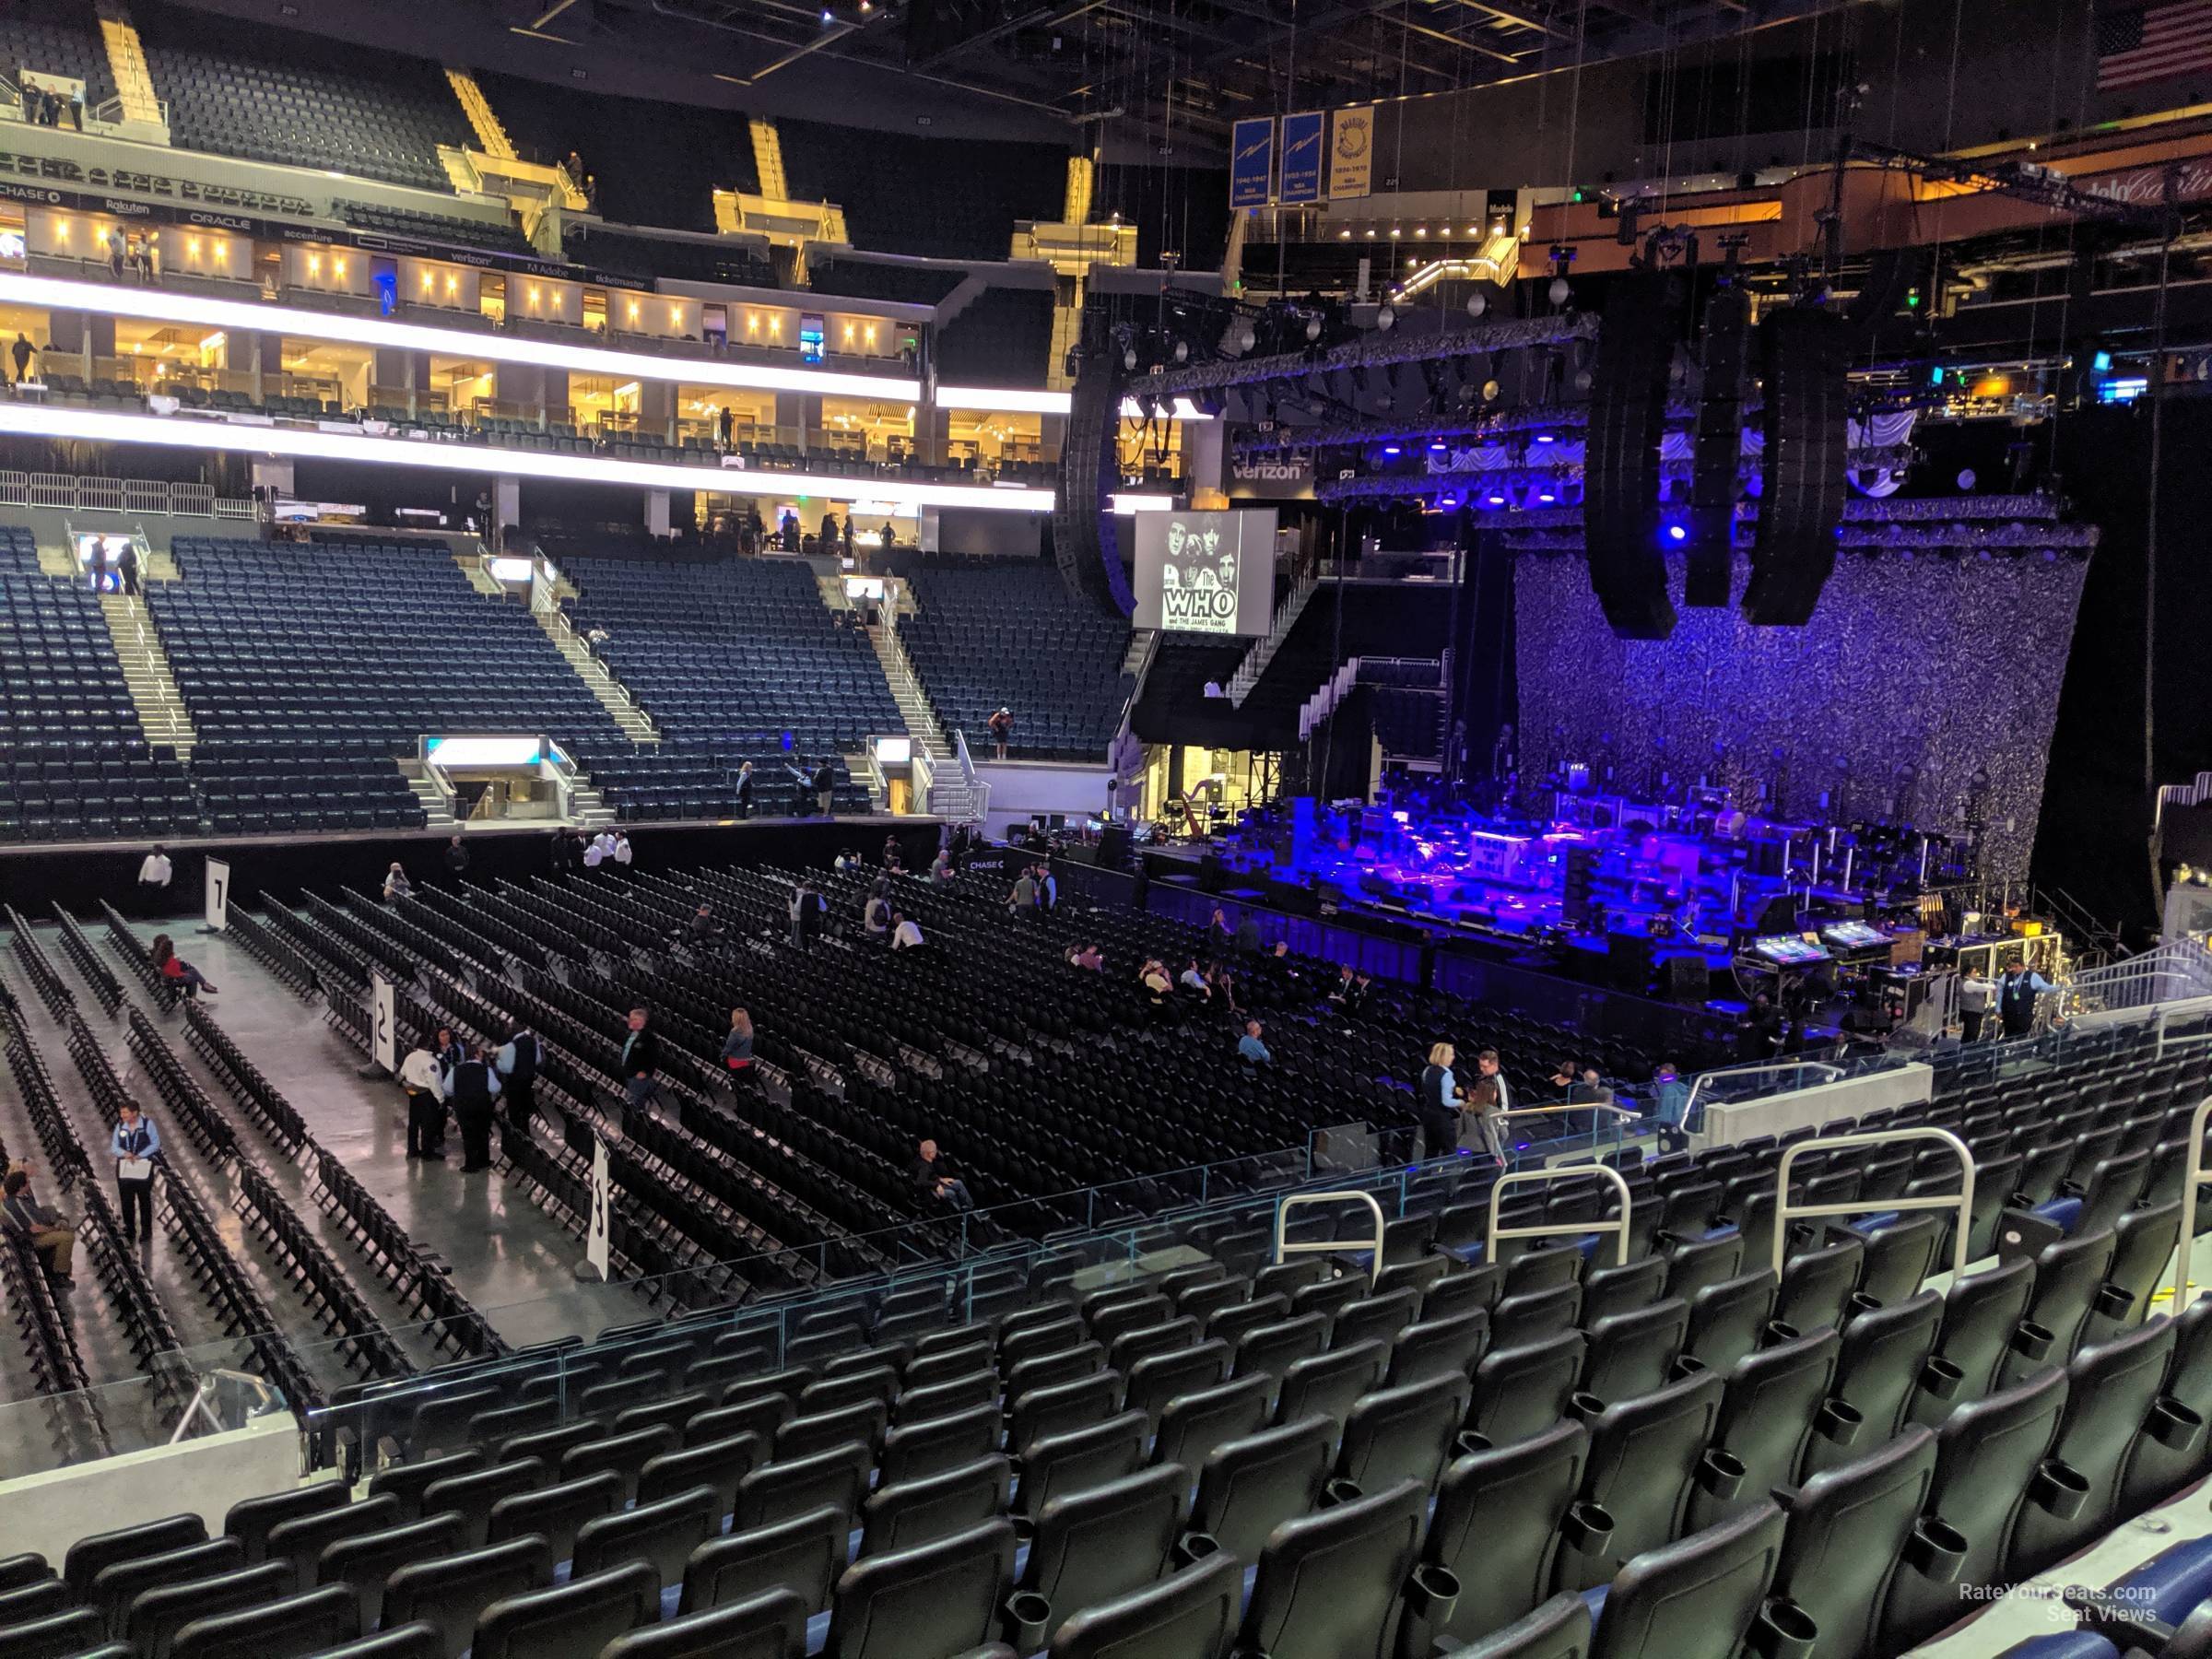 Section 104 at Chase Center for Concerts